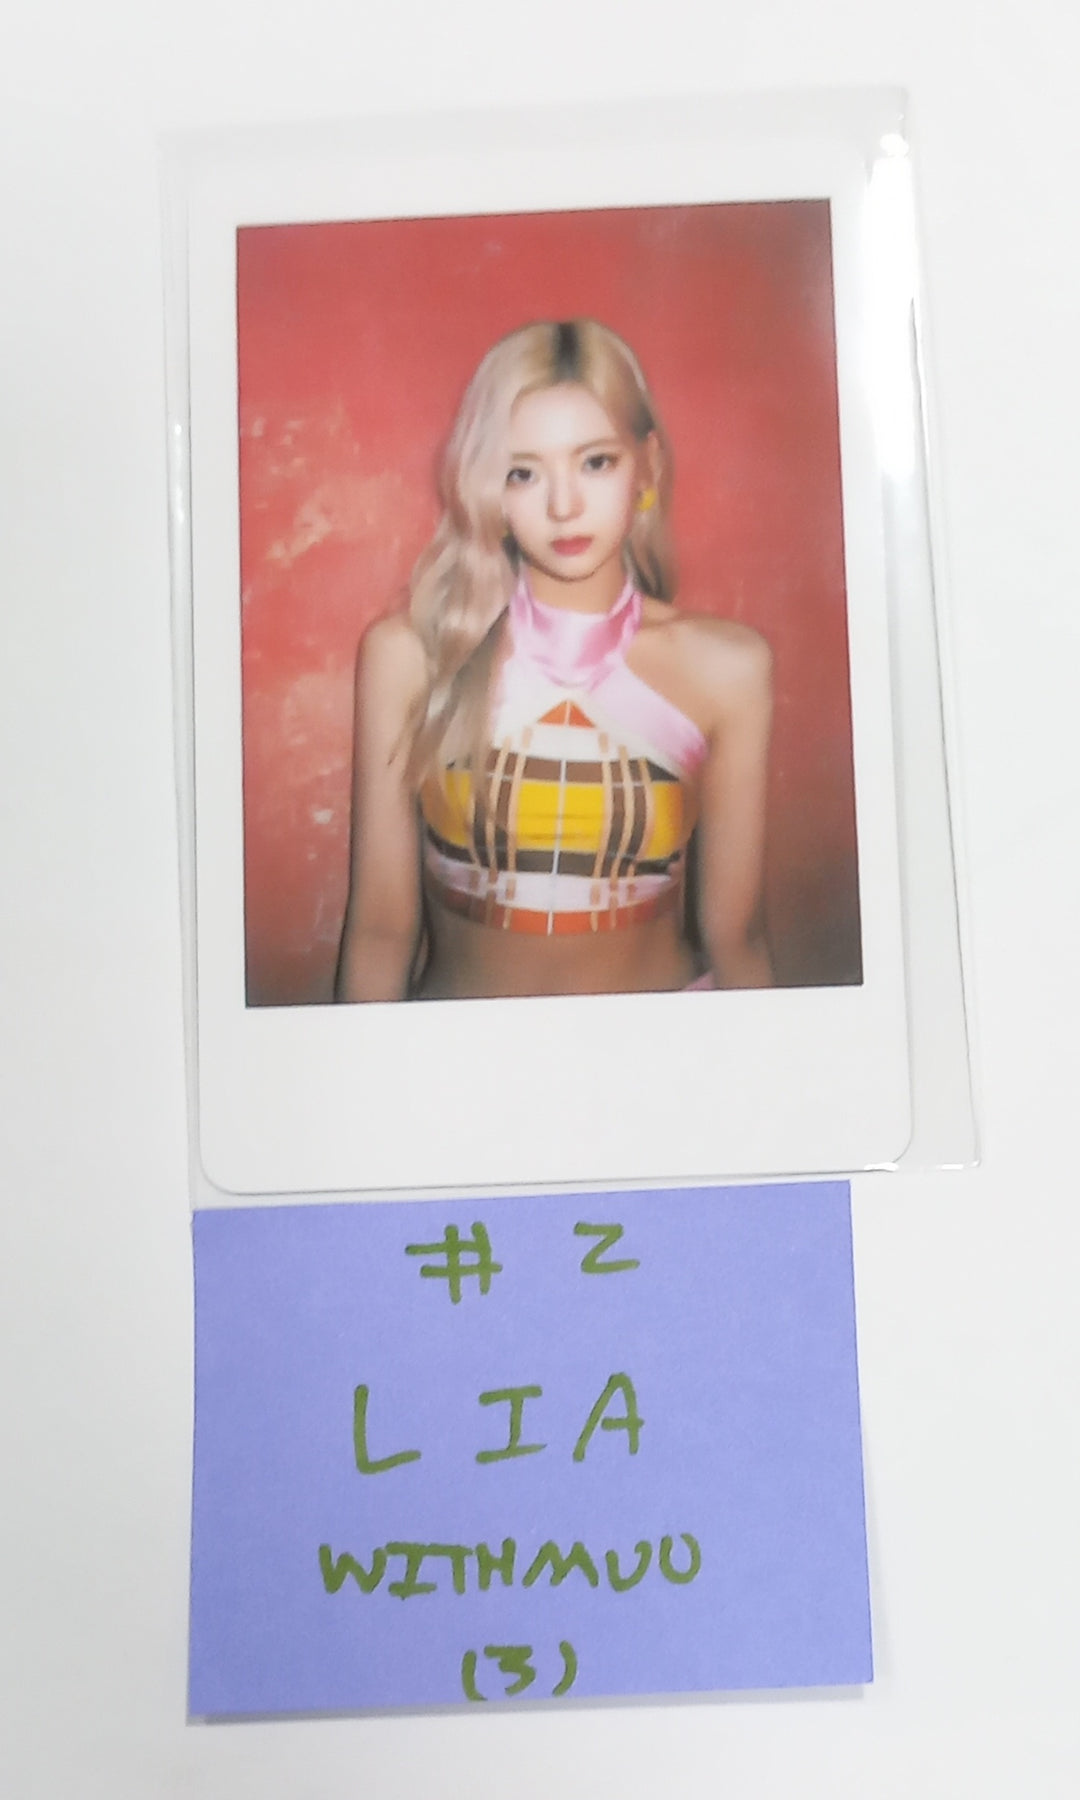 ITZY "KILL MY DOUBT" - Withmuu Fansign Event Photocard Round 5 [23.09.14]